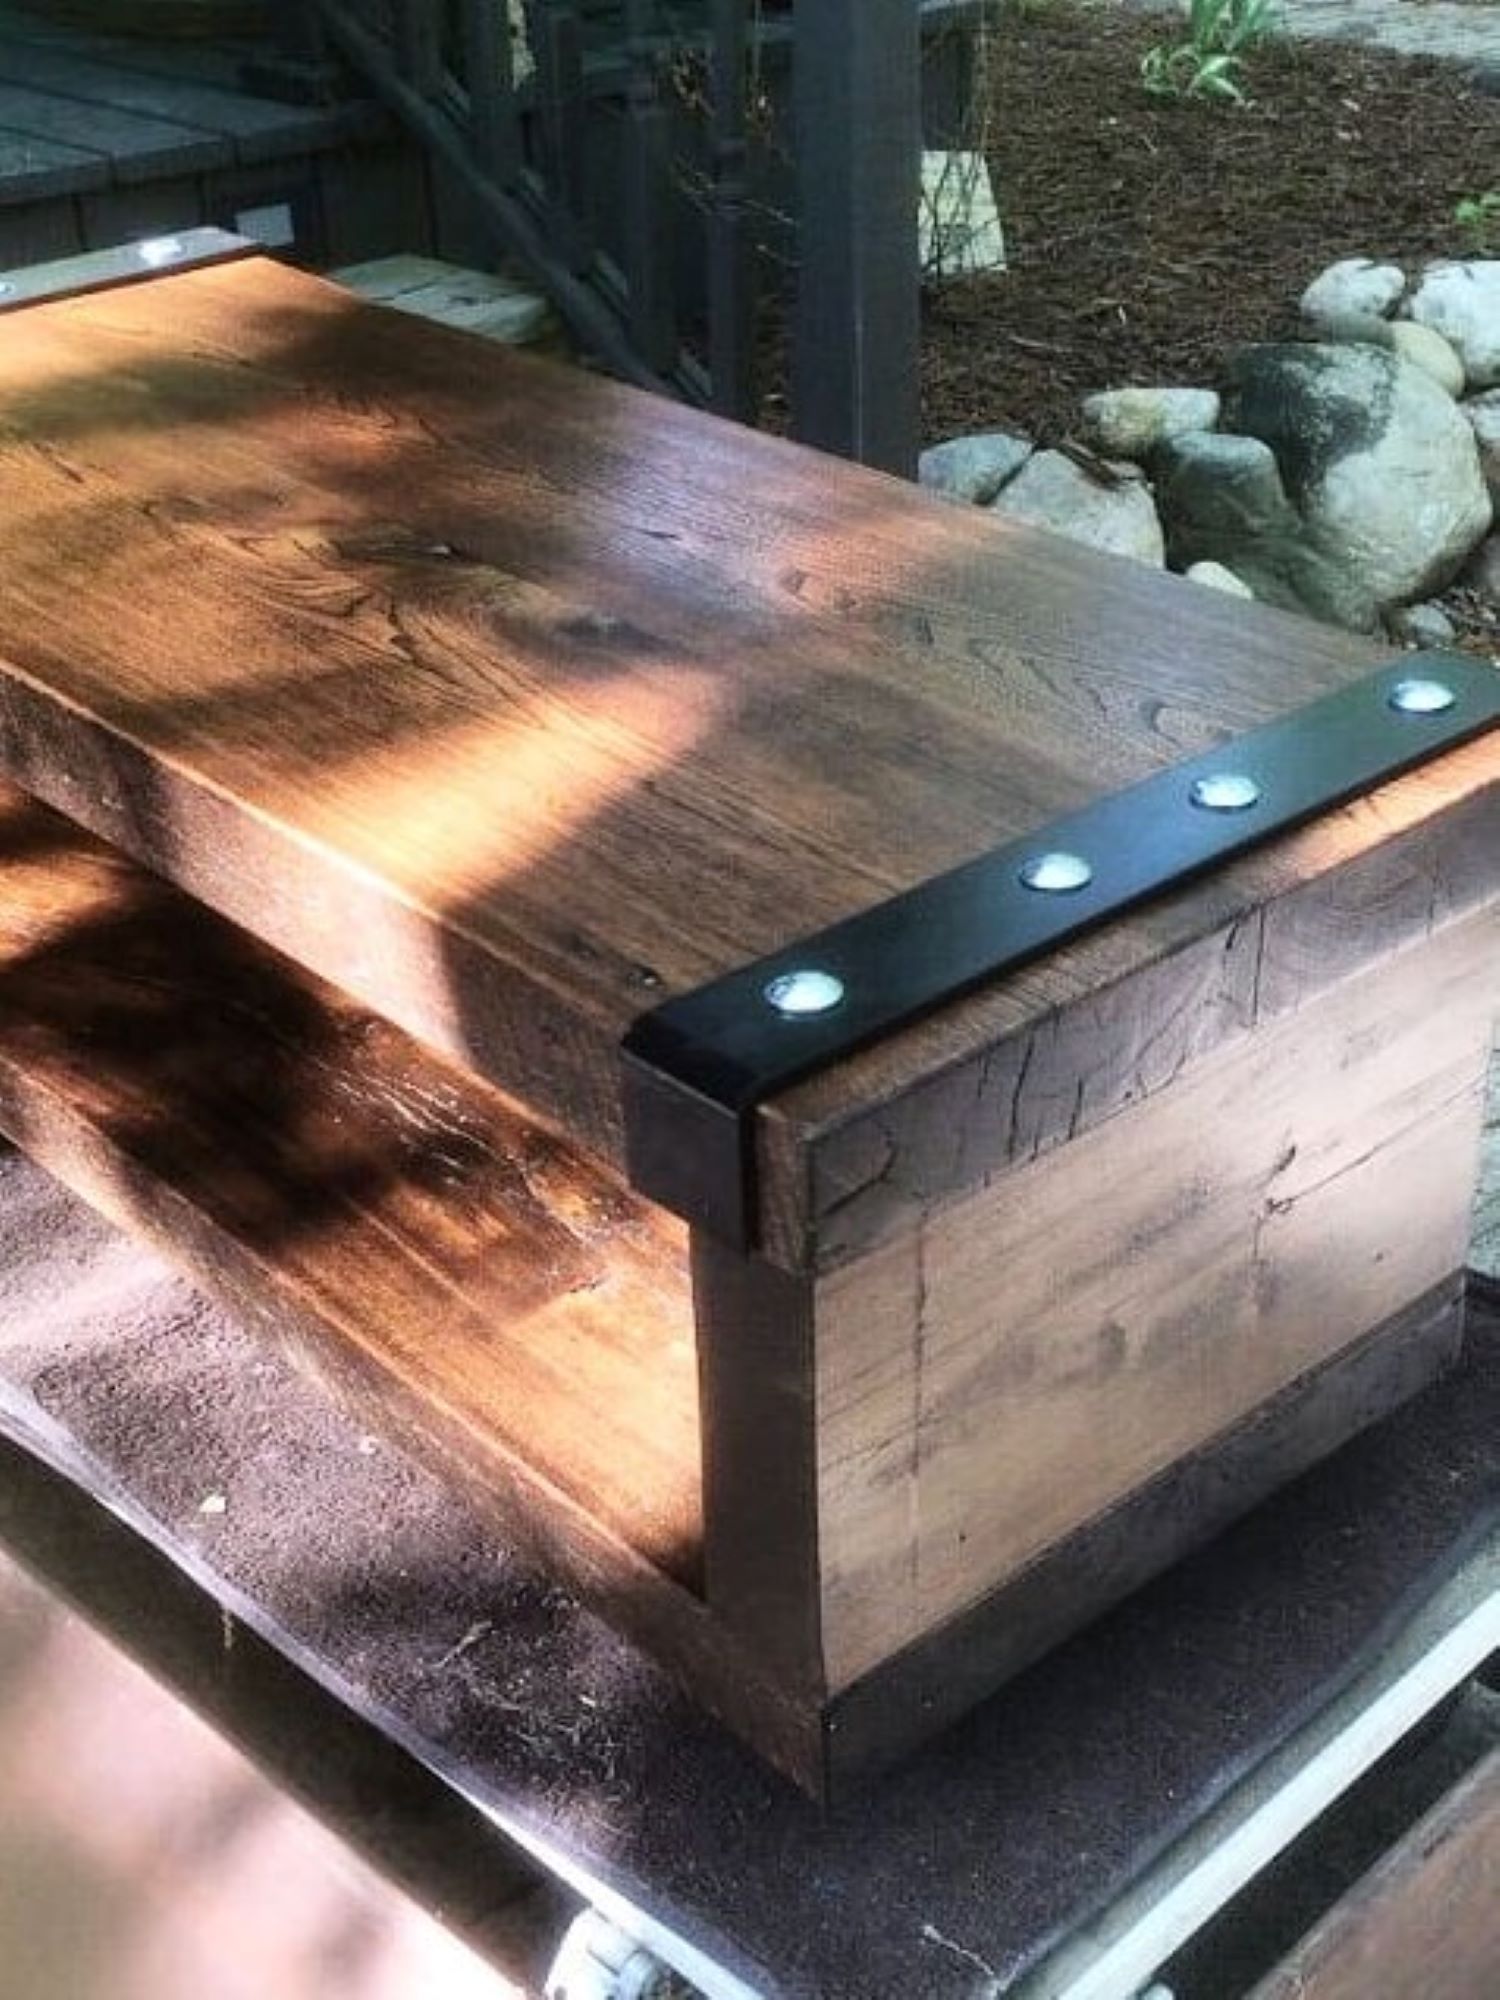 A handcrafted coffee table, made by a customer